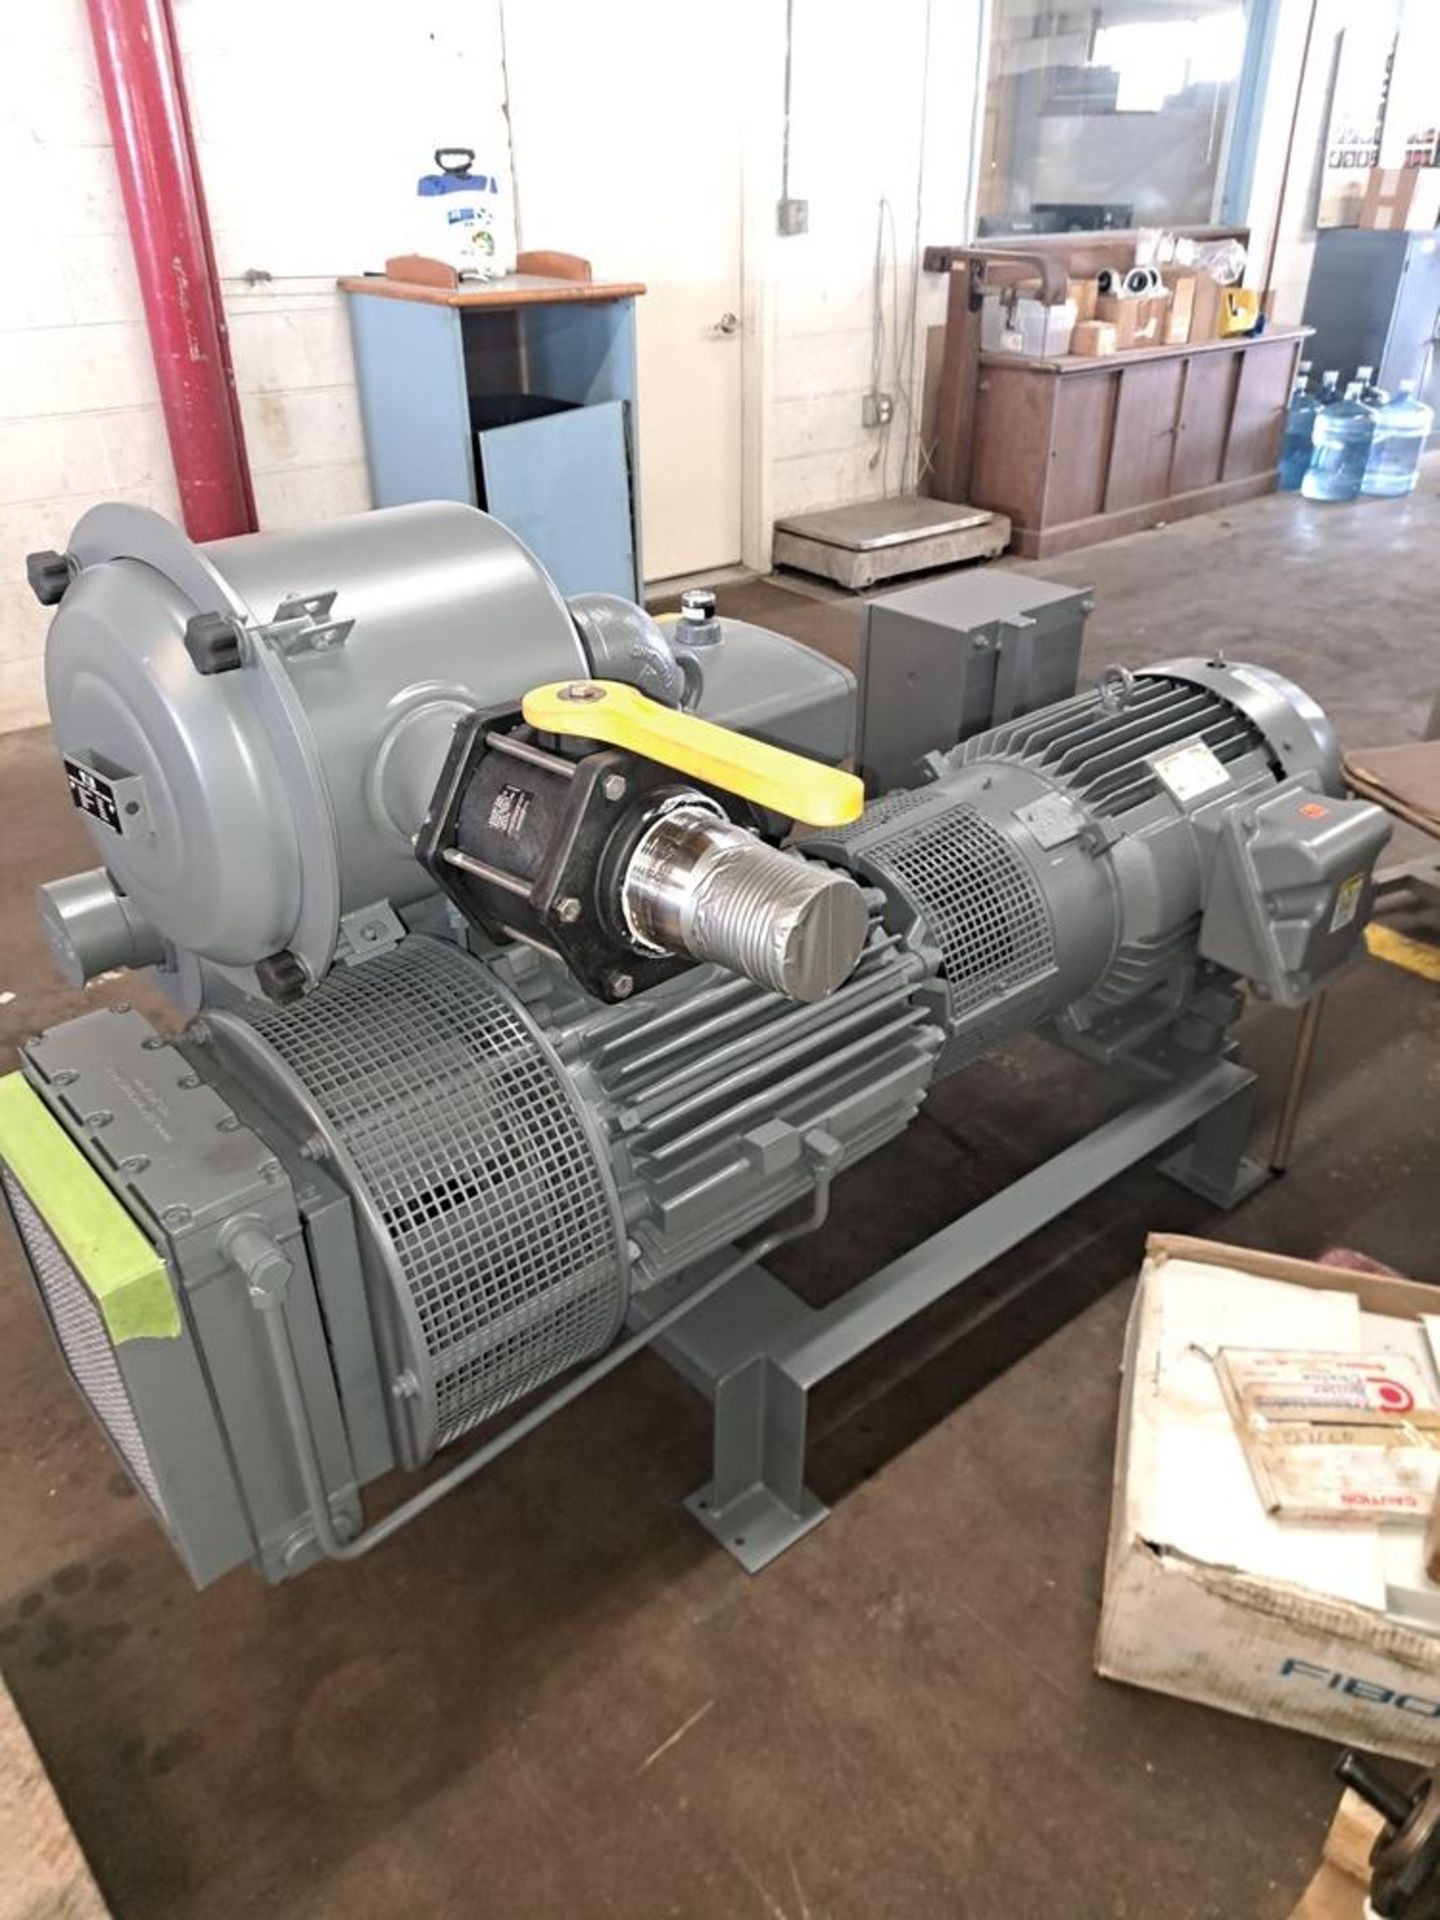 TMS Mdl. RVO630 Vacuum Pump (New Condition),25 h.p., 190/380 volts, 50 Hz, 230/460 volts, 3 phase, - Image 3 of 8